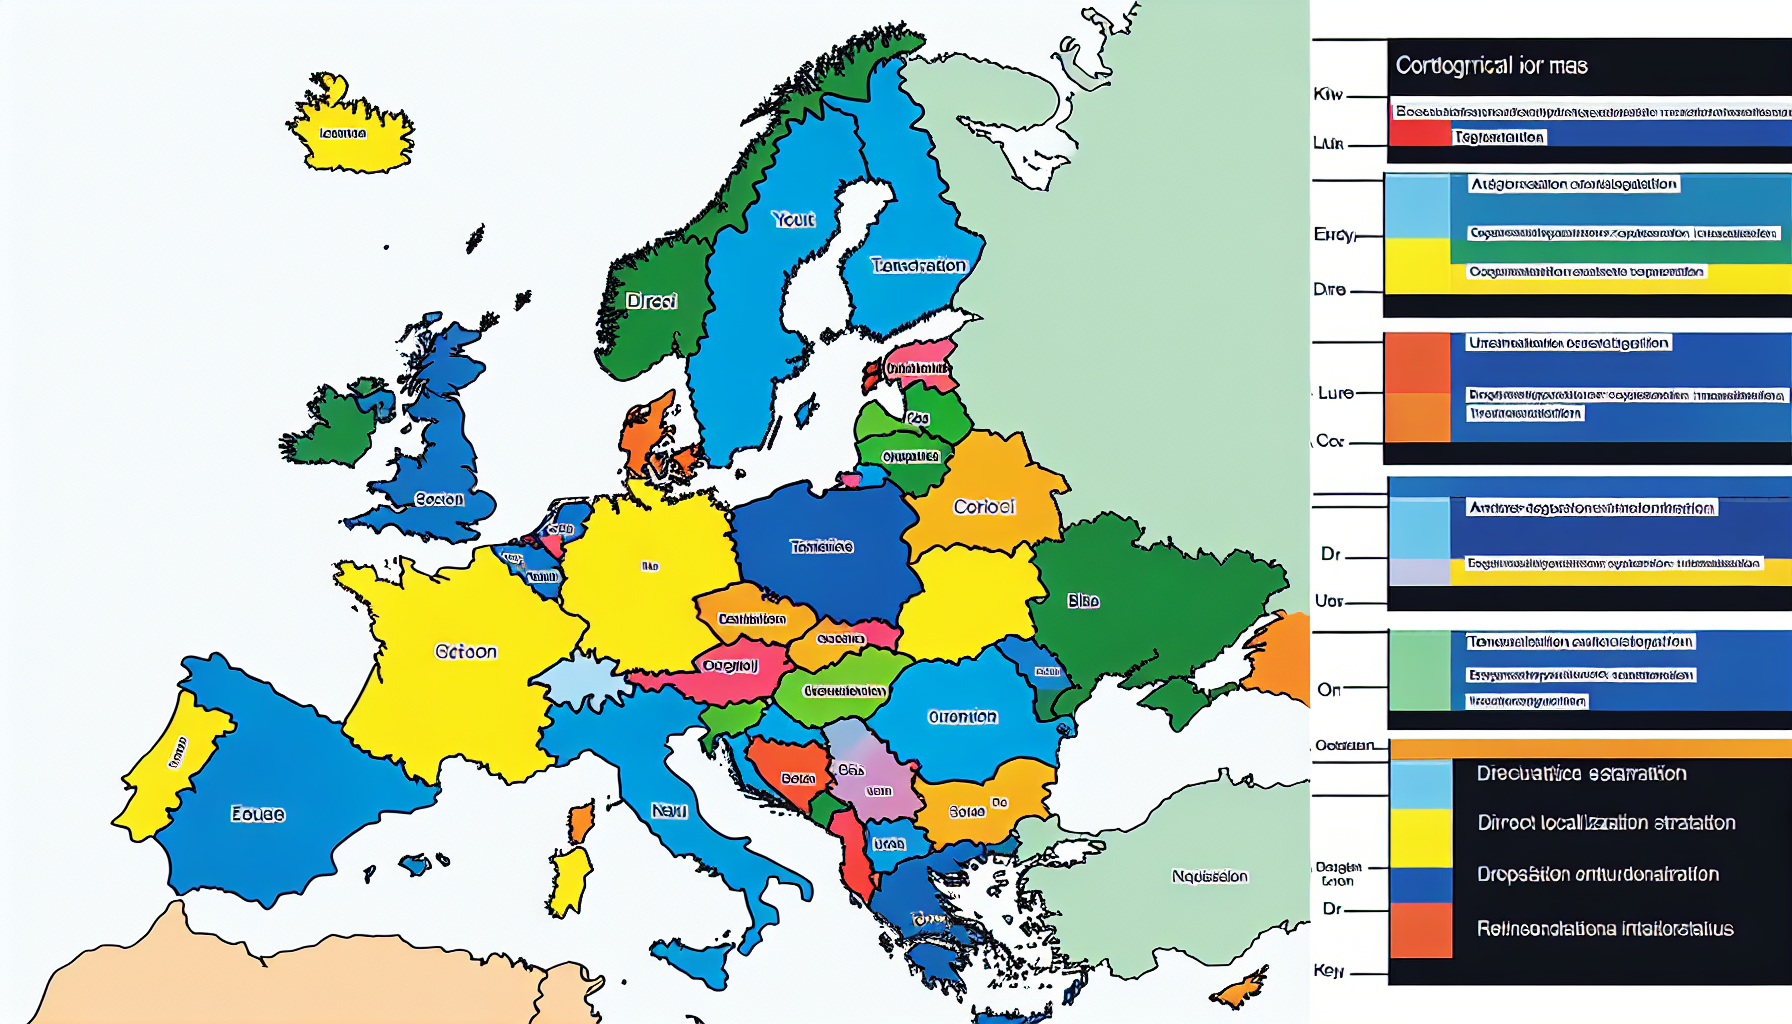 Map highlighting different localization strategies across Europe